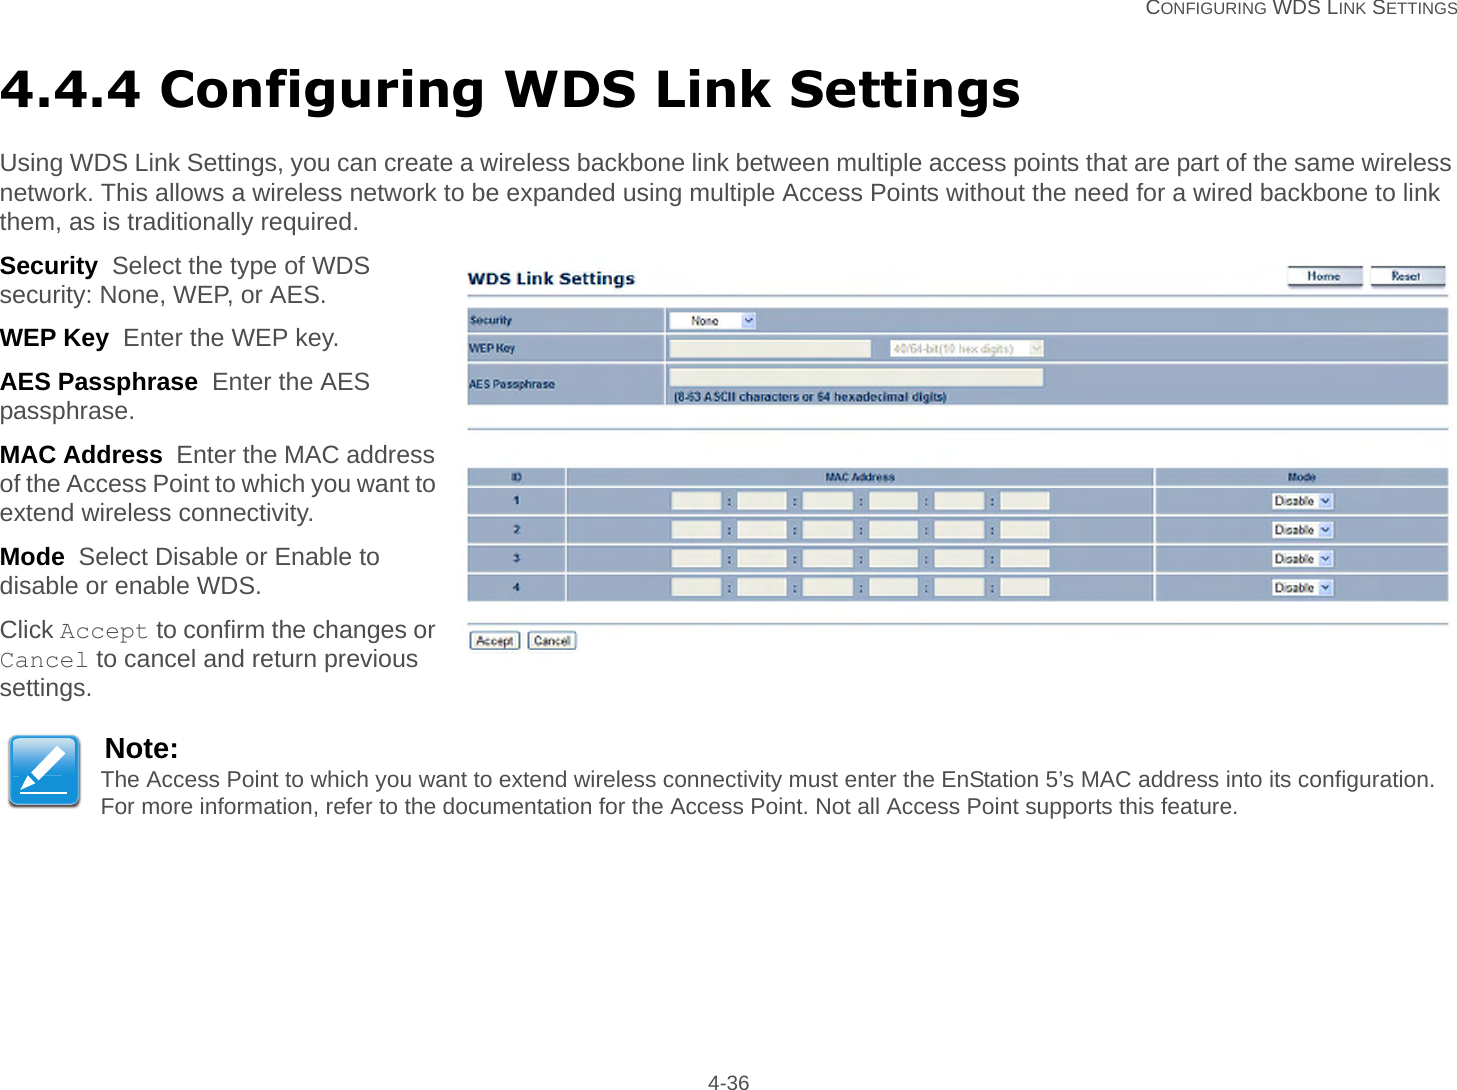   CONFIGURING WDS LINK SETTINGS 4-364.4.4 Configuring WDS Link SettingsUsing WDS Link Settings, you can create a wireless backbone link between multiple access points that are part of the same wireless network. This allows a wireless network to be expanded using multiple Access Points without the need for a wired backbone to link them, as is traditionally required.Security  Select the type of WDS security: None, WEP, or AES.WEP Key  Enter the WEP key.AES Passphrase  Enter the AES passphrase.MAC Address  Enter the MAC address of the Access Point to which you want to extend wireless connectivity.Mode  Select Disable or Enable to disable or enable WDS.Click Accept to confirm the changes or Cancel to cancel and return previous settings.Note:The Access Point to which you want to extend wireless connectivity must enter the EnStation 5’s MAC address into its configuration. For more information, refer to the documentation for the Access Point. Not all Access Point supports this feature.